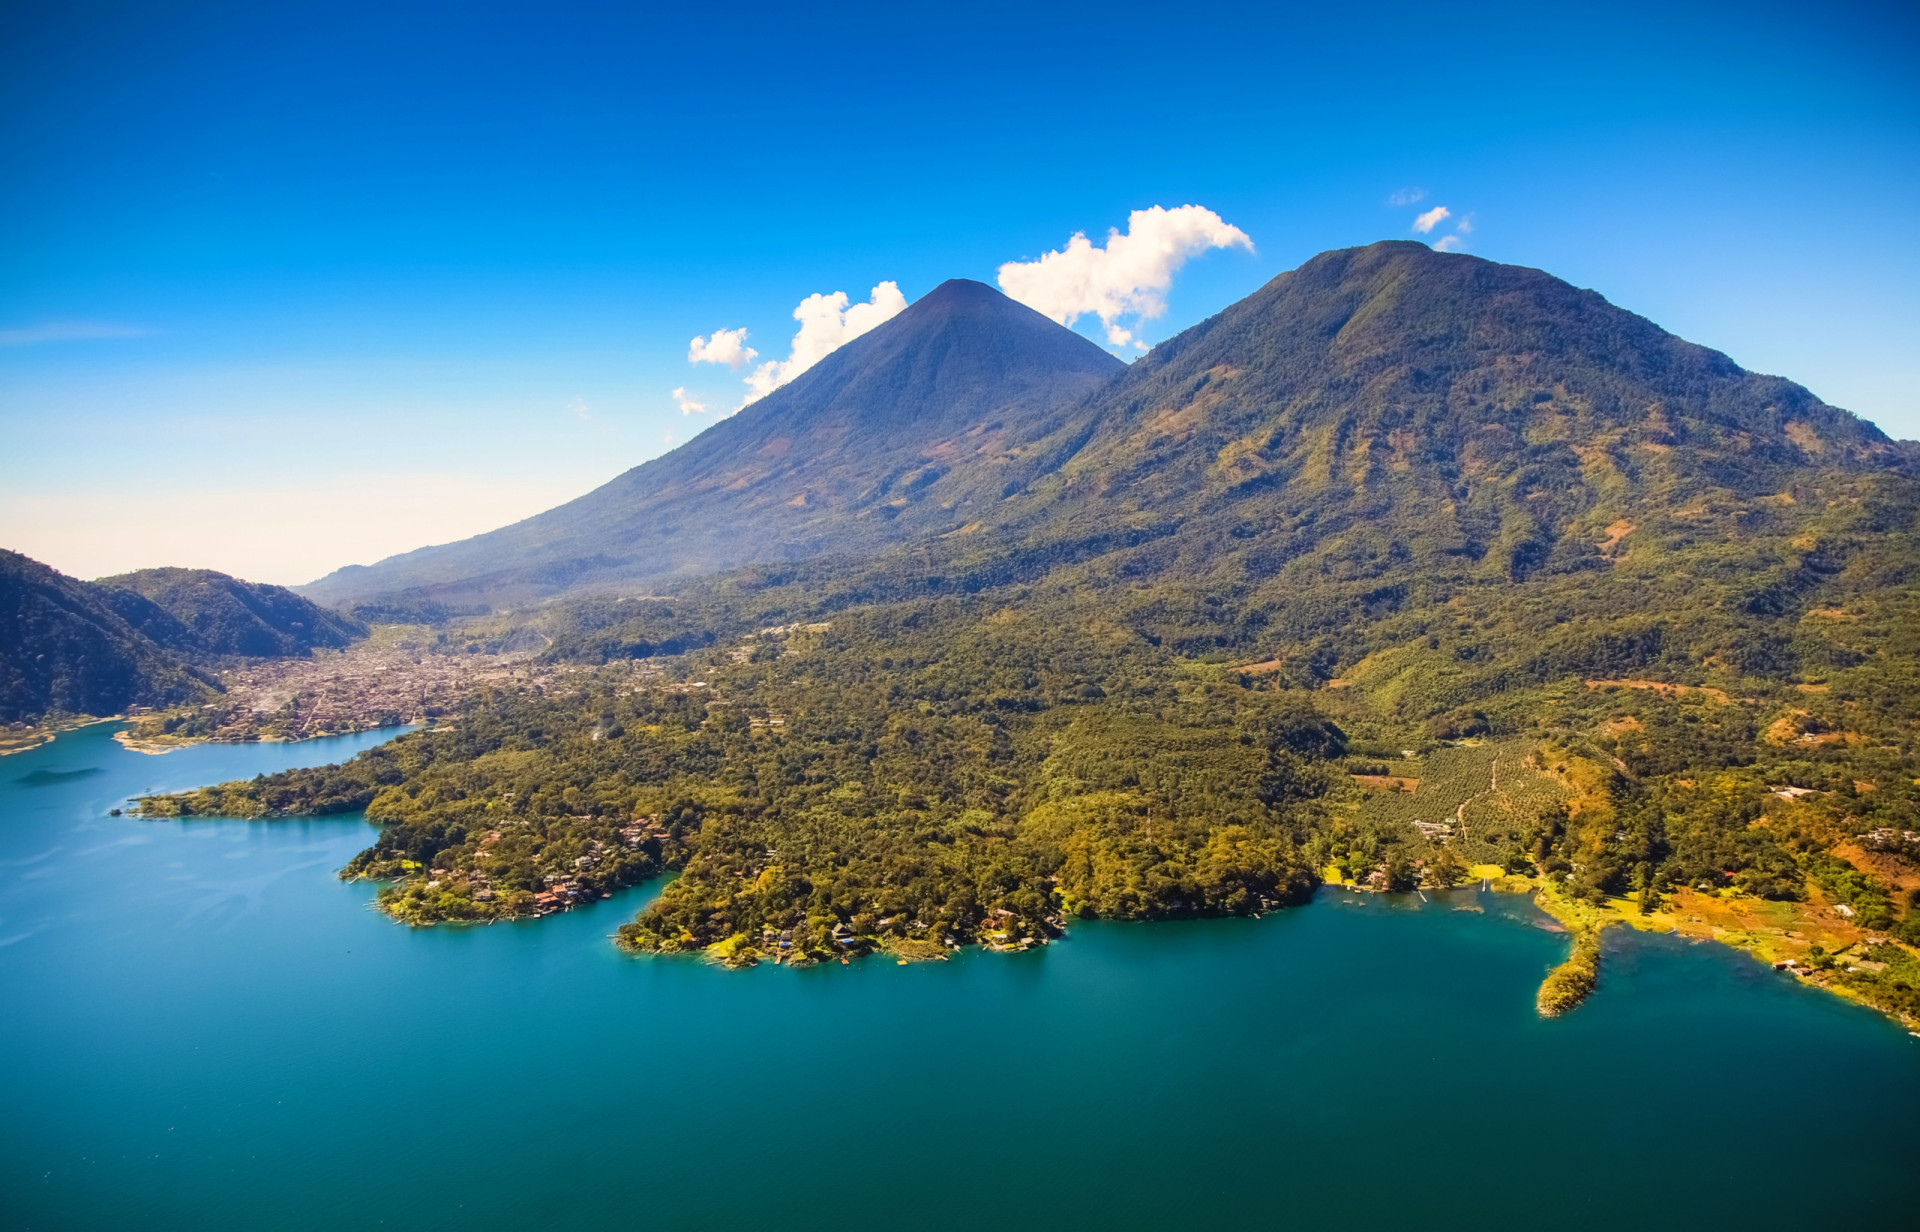 <p>Atitlán in the Solalá highlands is regularly voted as one of the most beautiful lakes in the world. Created approximately 84,000 years ago as a result of a volcanic eruption, this outstanding body of water is framed by the volcanoes Atitlán, Tolimán, and San Pedro—"The Three Giants"—to form an impressive landscape.</p><p>You may also like:<a href="https://www.starsinsider.com/n/268155?utm_source=msn.com&utm_medium=display&utm_campaign=referral_description&utm_content=627756en-en"> Shocking celebrity arrests </a></p>